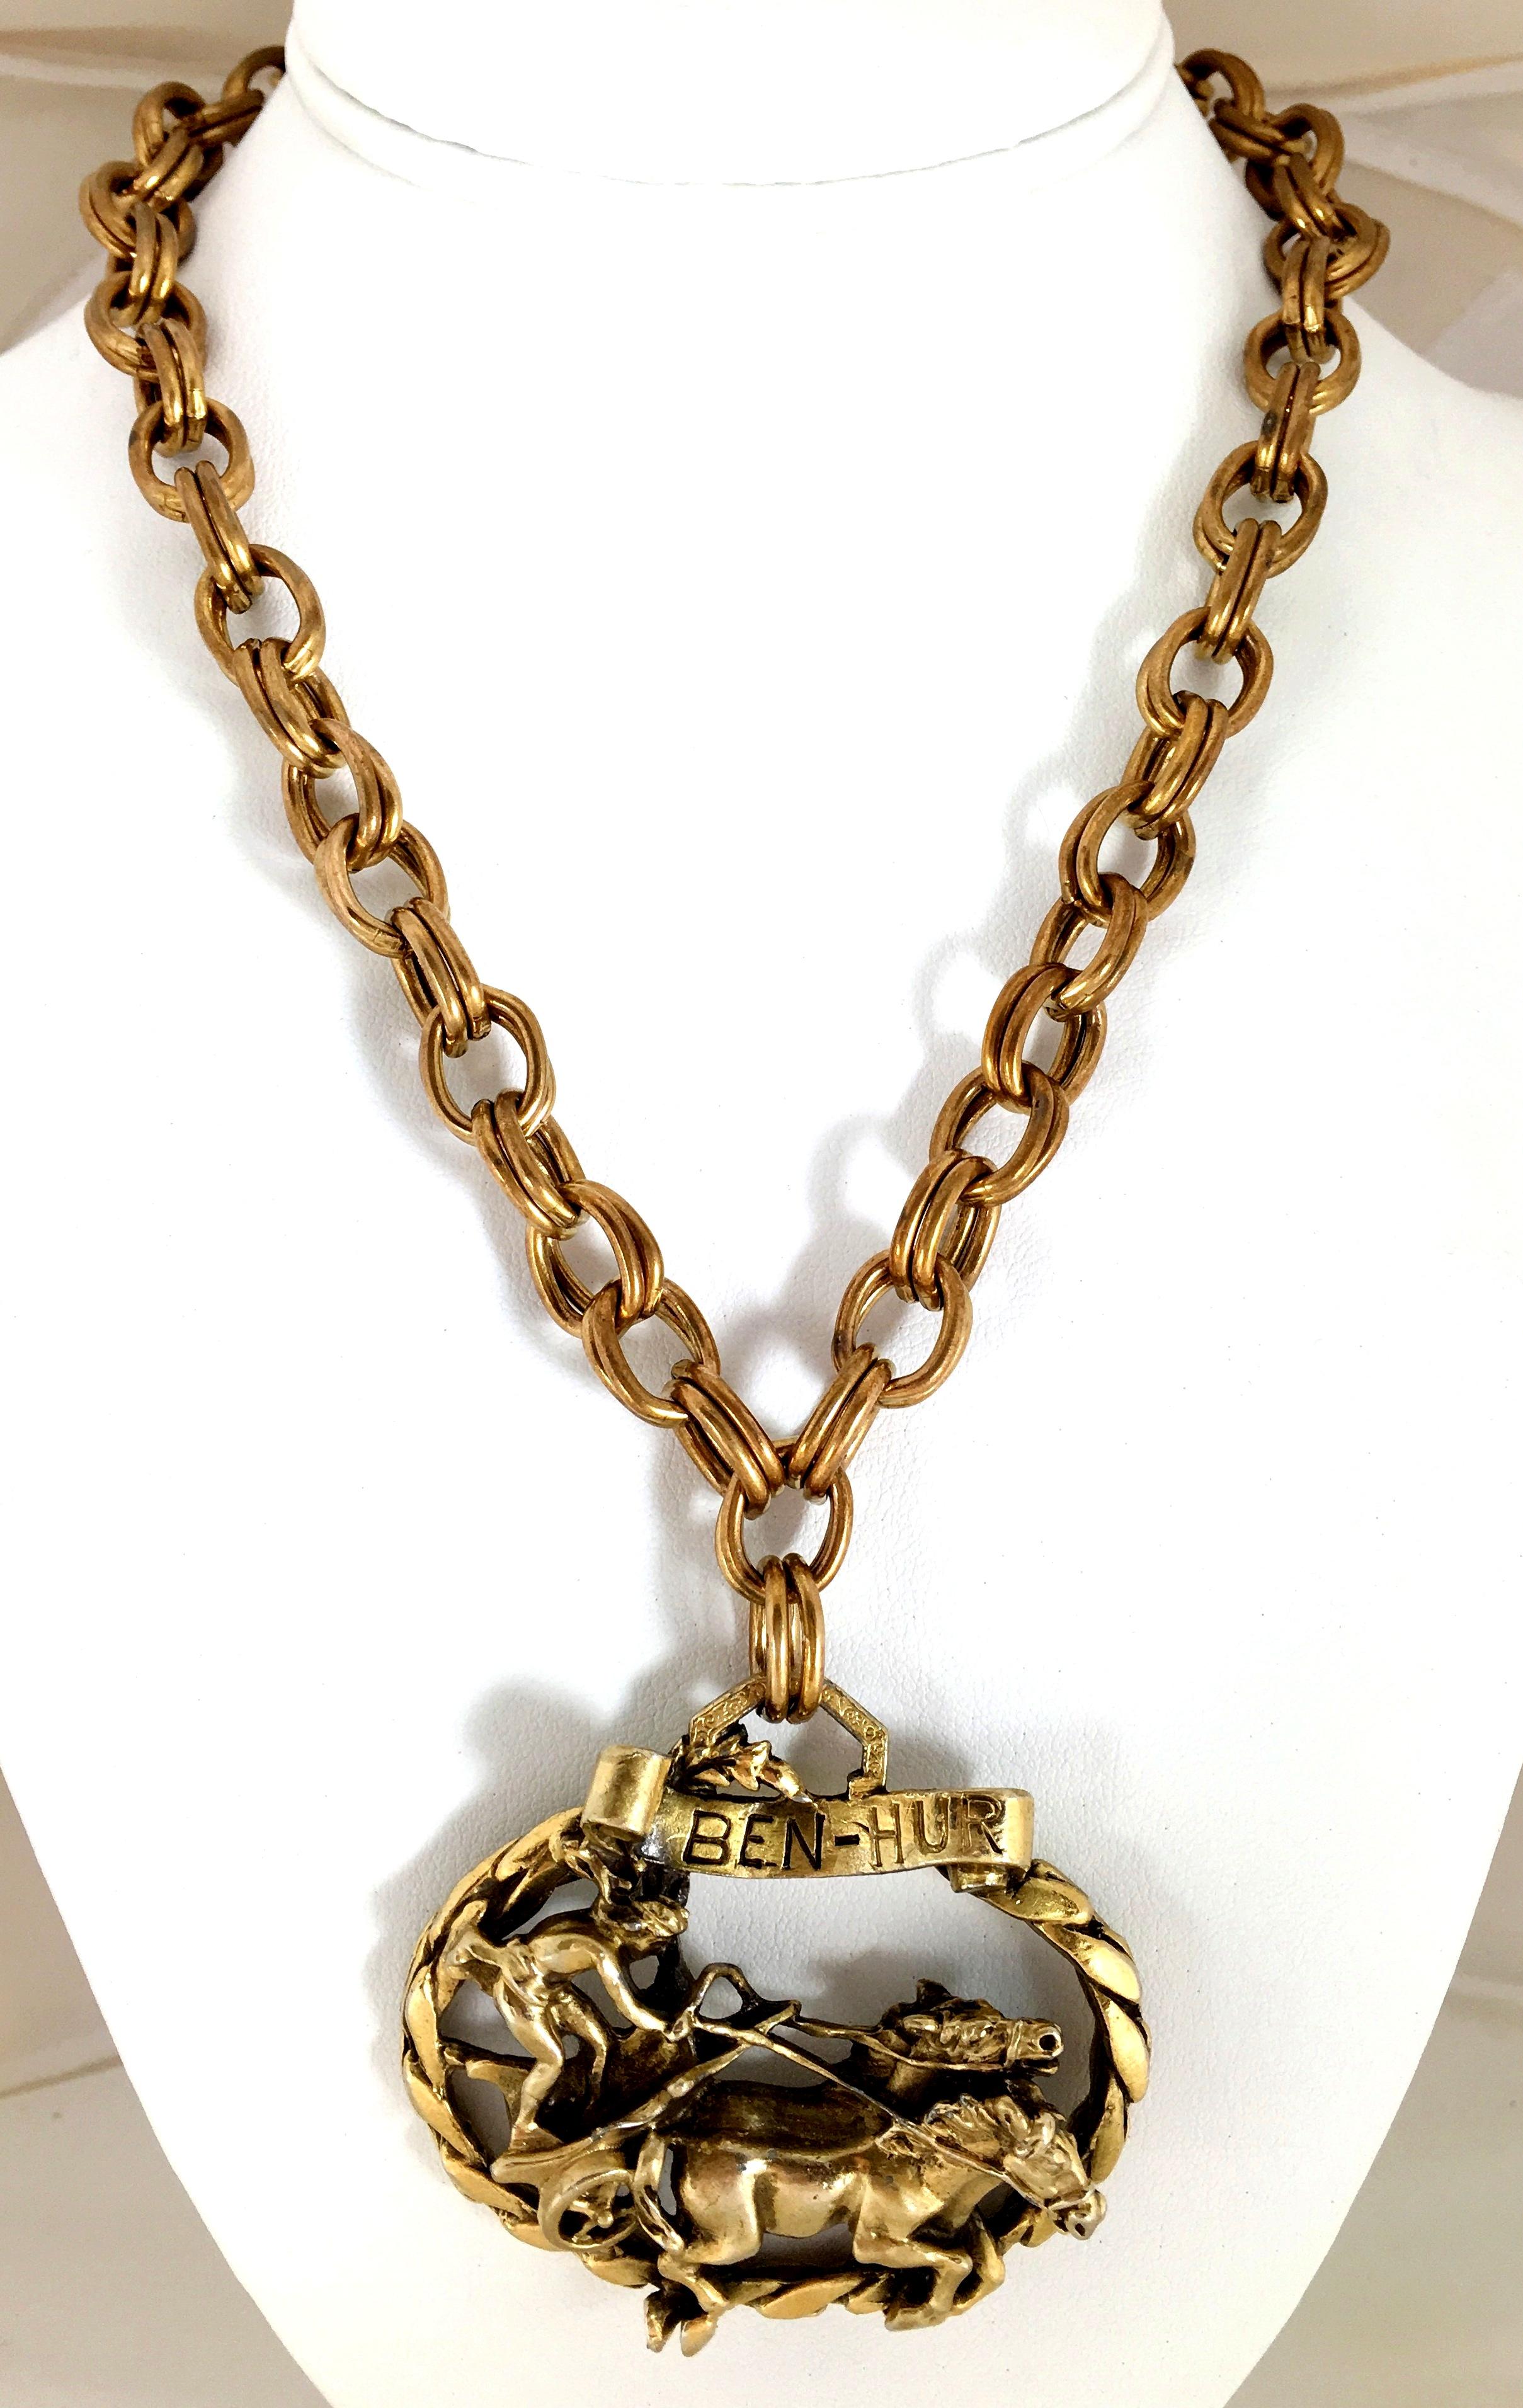 1960'S  Gilt Gold Ben-Hur pendant necklace in the style of Joseff of Hollywood. This iconic motif executed in  gilt brass plate with chain link necklace and large pendant. Joseff of Hollywood was well known for and is unsigned. Amazing intricate